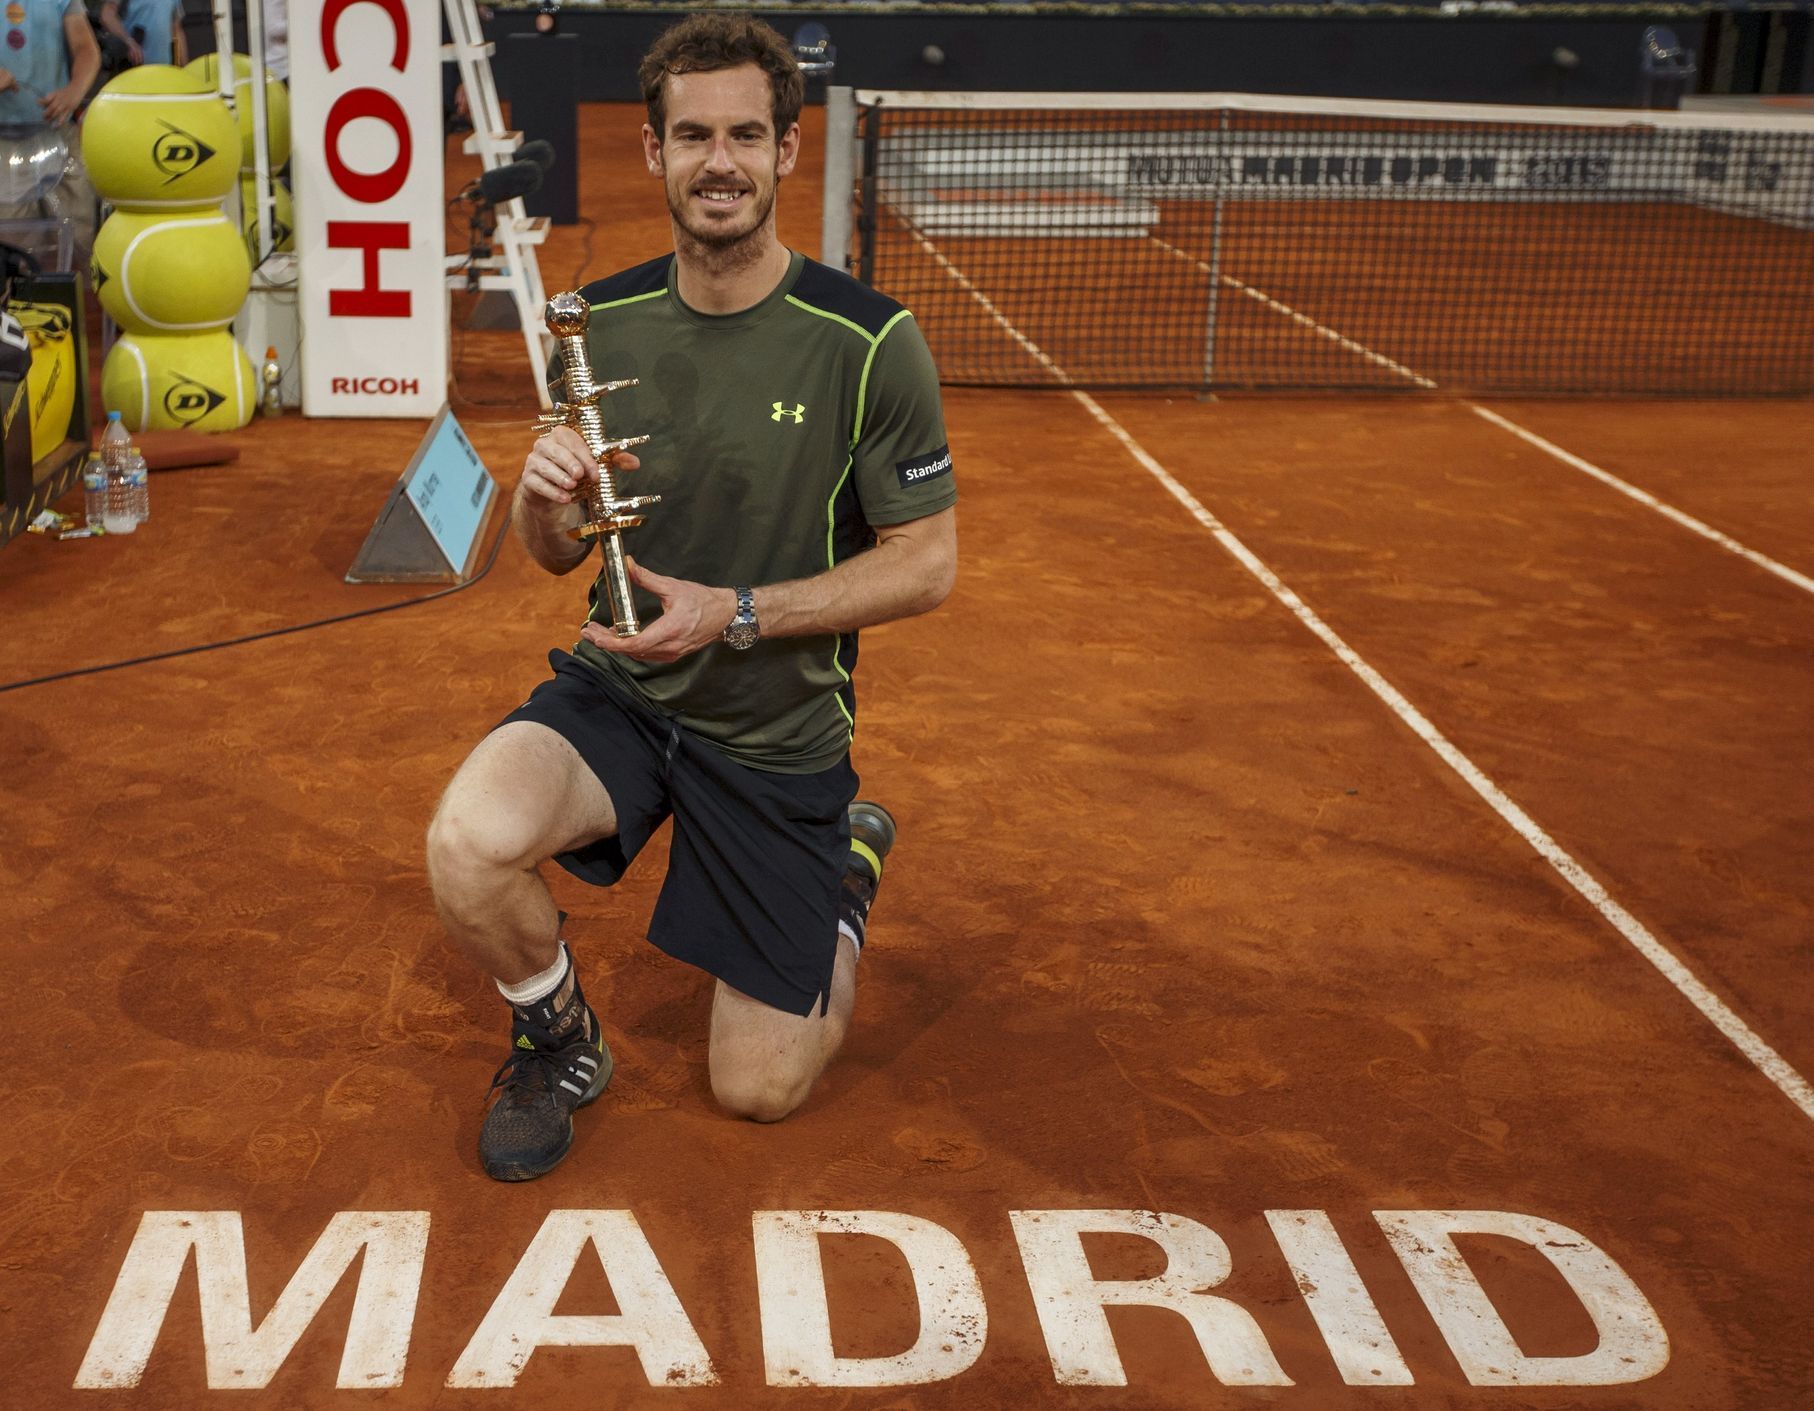 Britain's Murray poses with his trophy after winning the final match over Spain's Nadal at the Madrid Open tennis tournament in Madrid